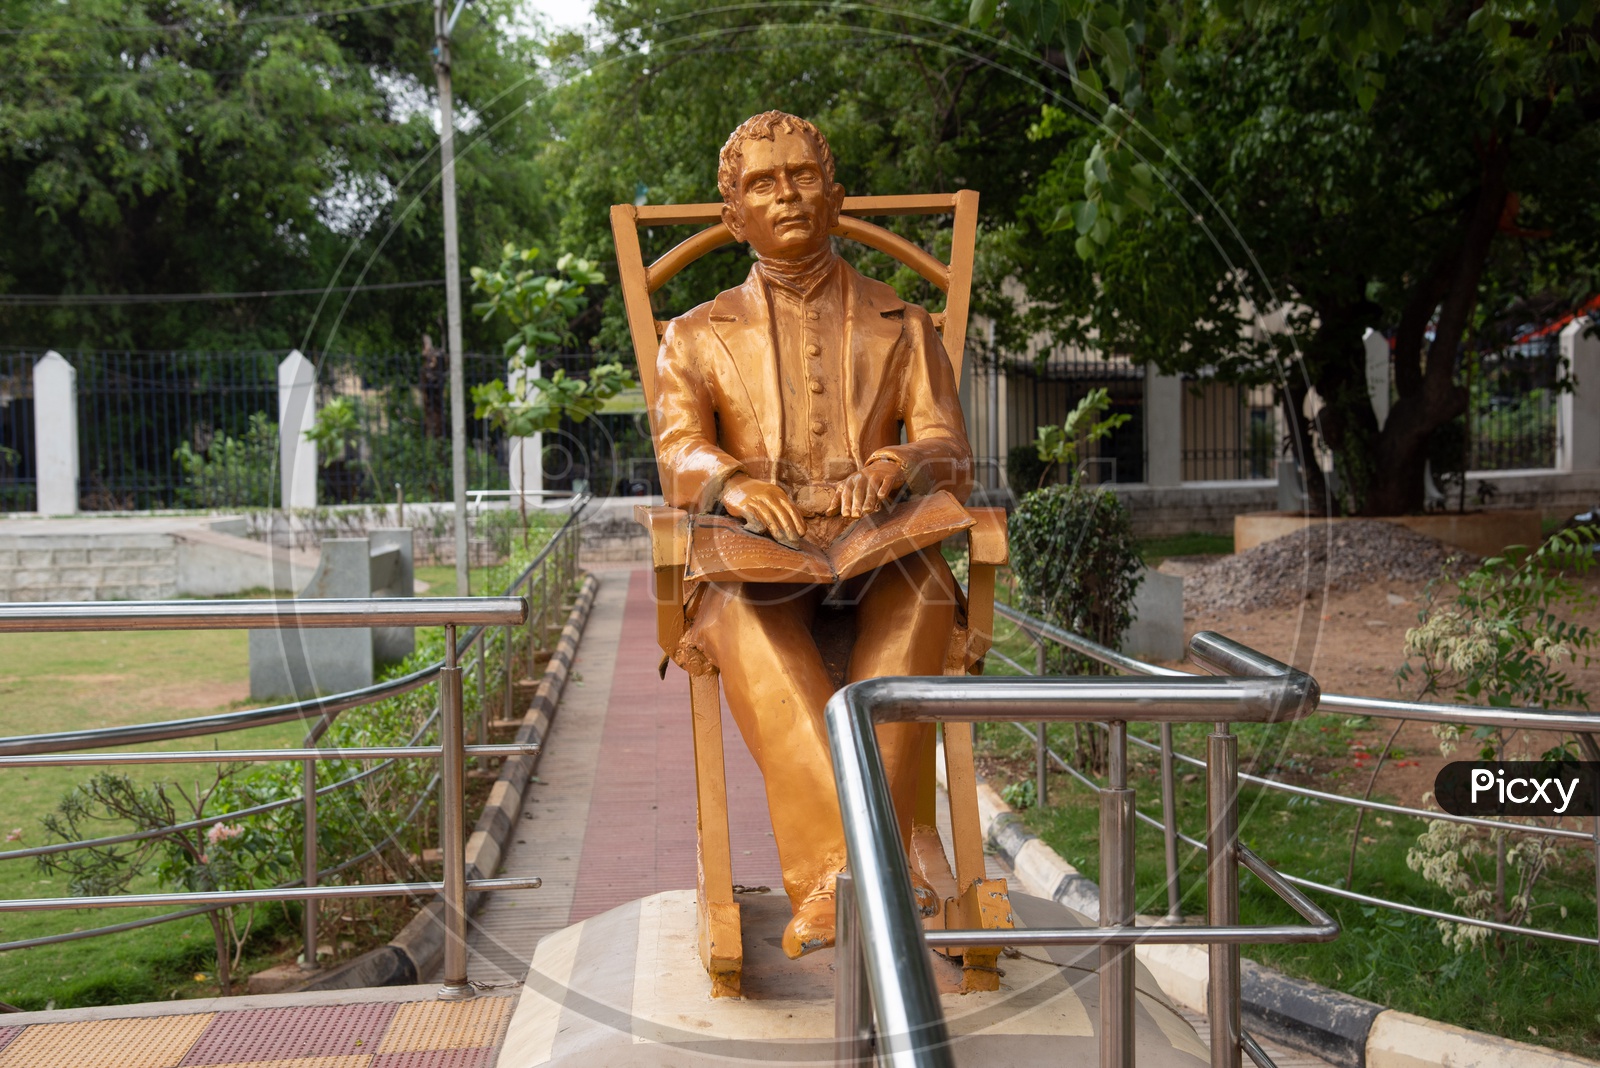 Sir Louis Brailles Statue at a Park in Hyderabad